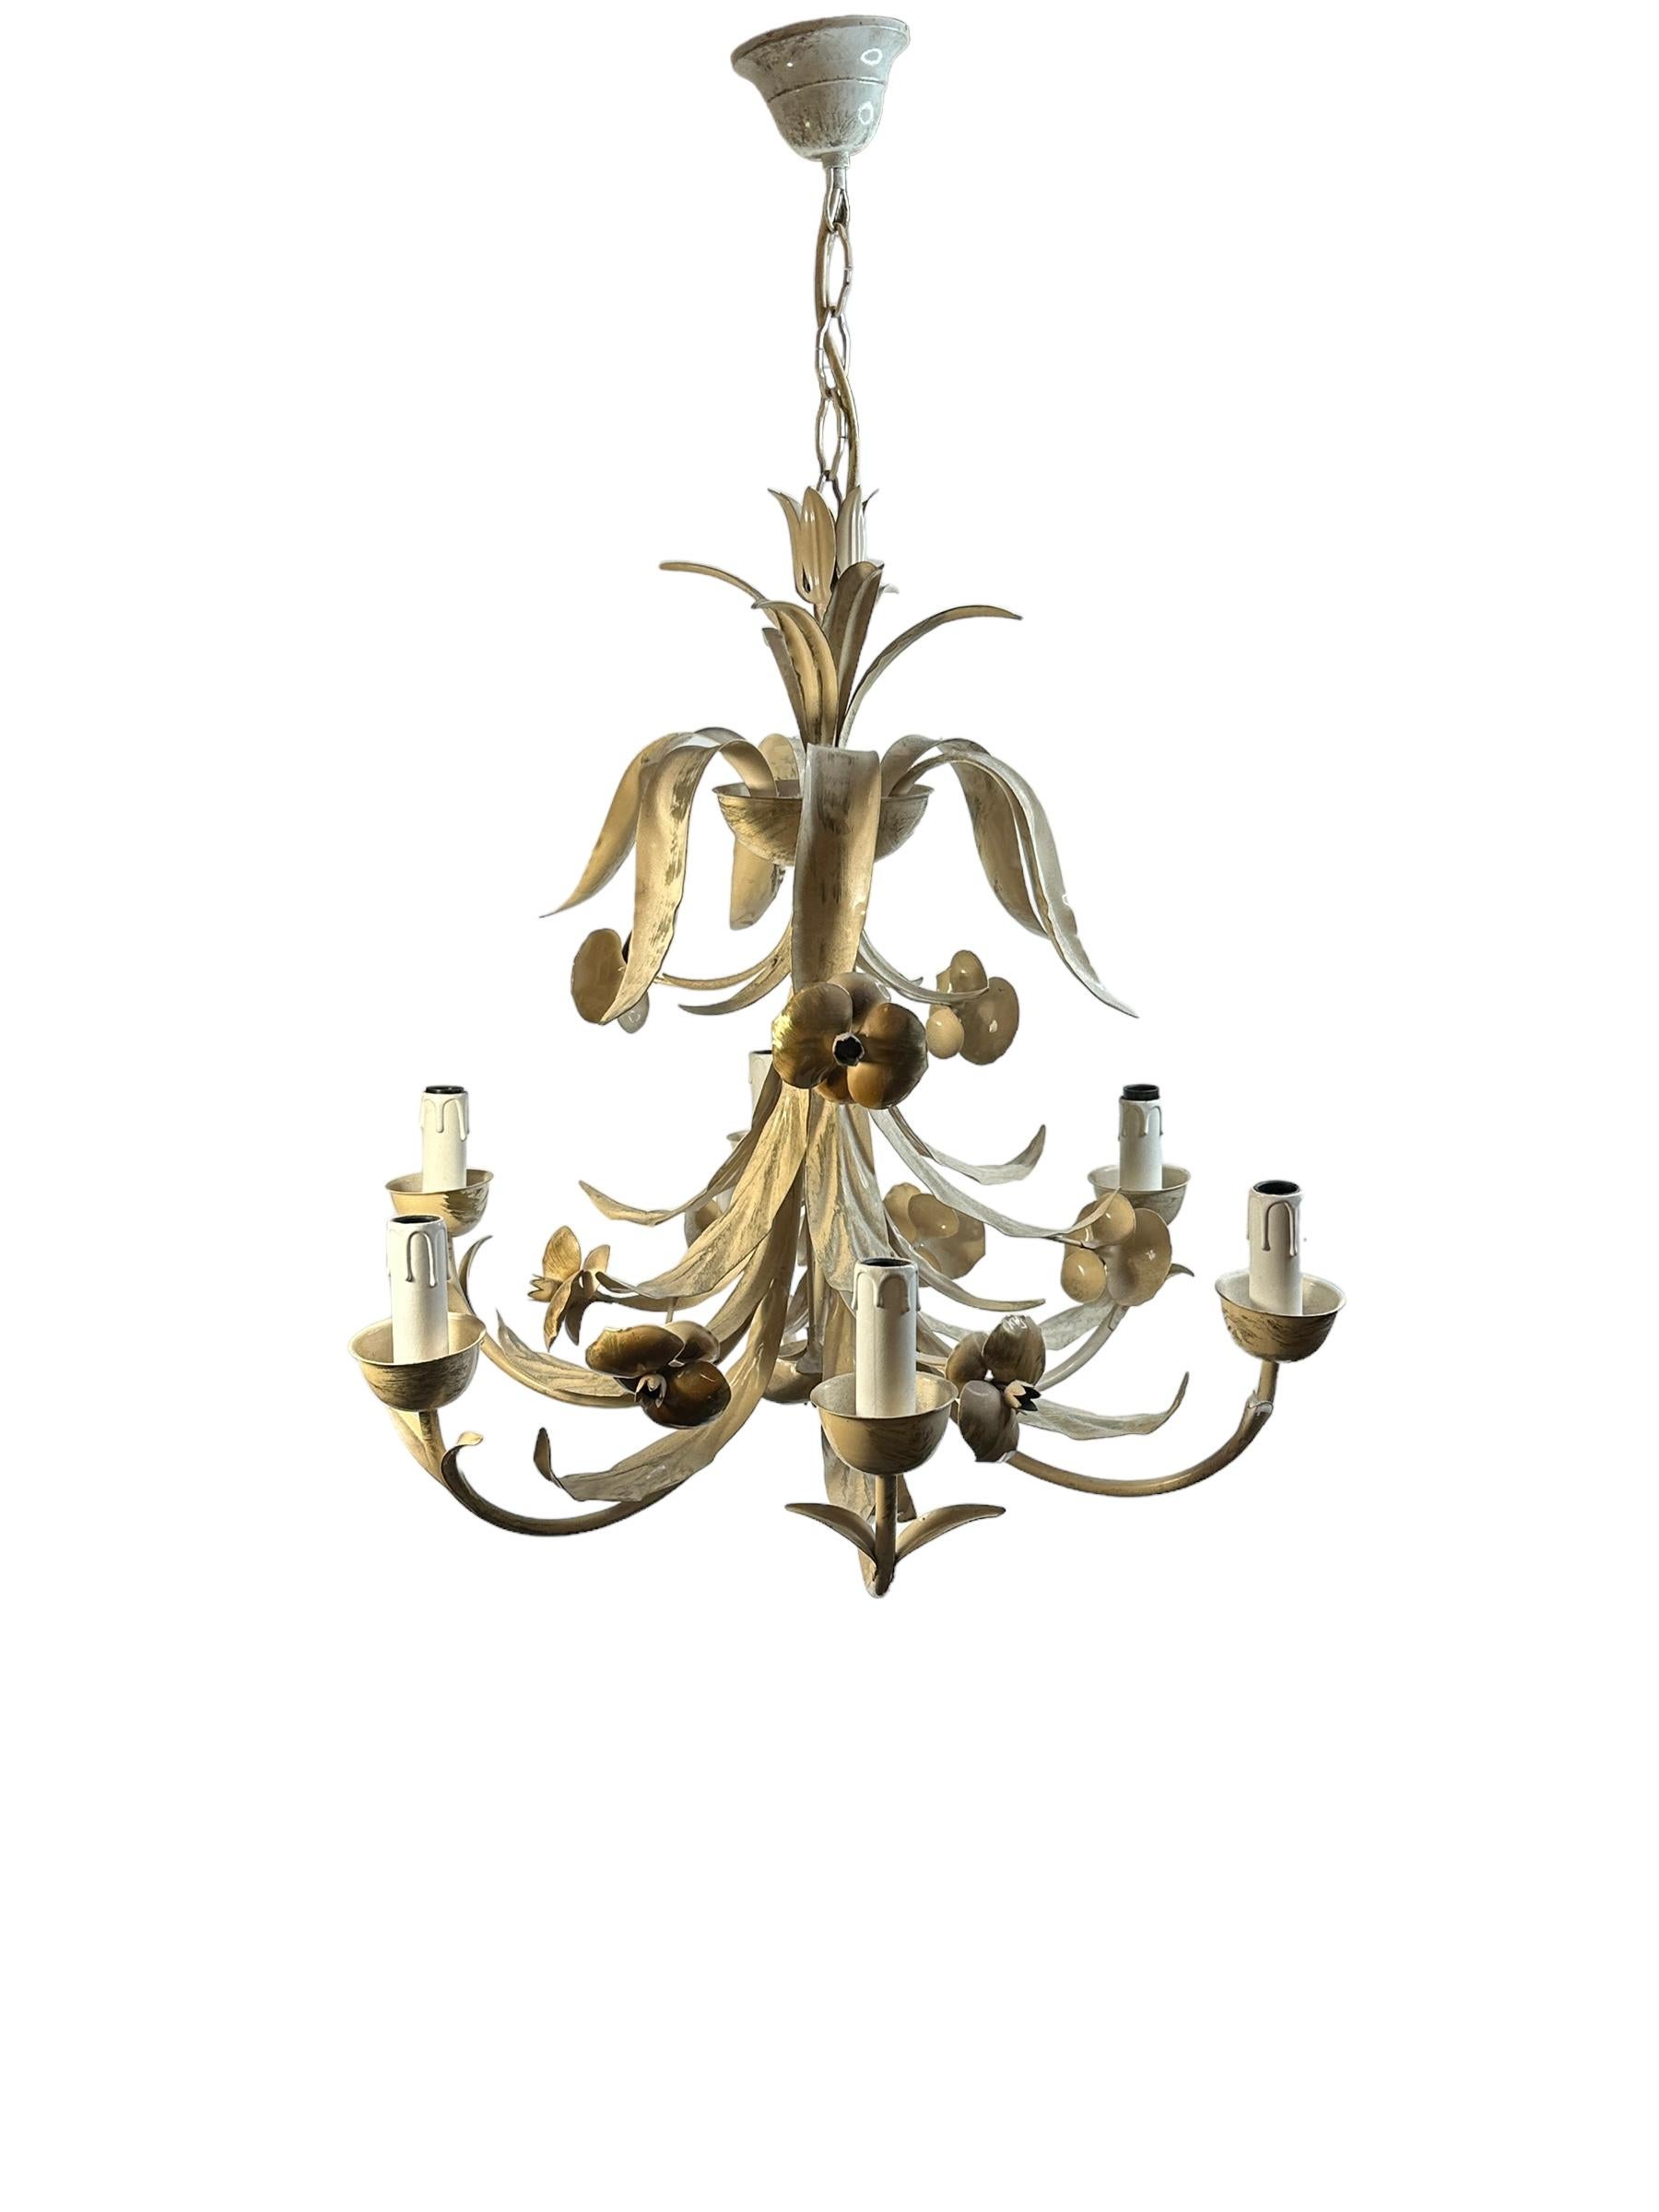 Petite Florentine style six-light chandelier. Functions as is with six E14 / 110 volt light bulbs. Can take up to 40 watts each bulb. Beautiful colored metal chandelier.
It gives the room a beautiful warm light and shows the French country or